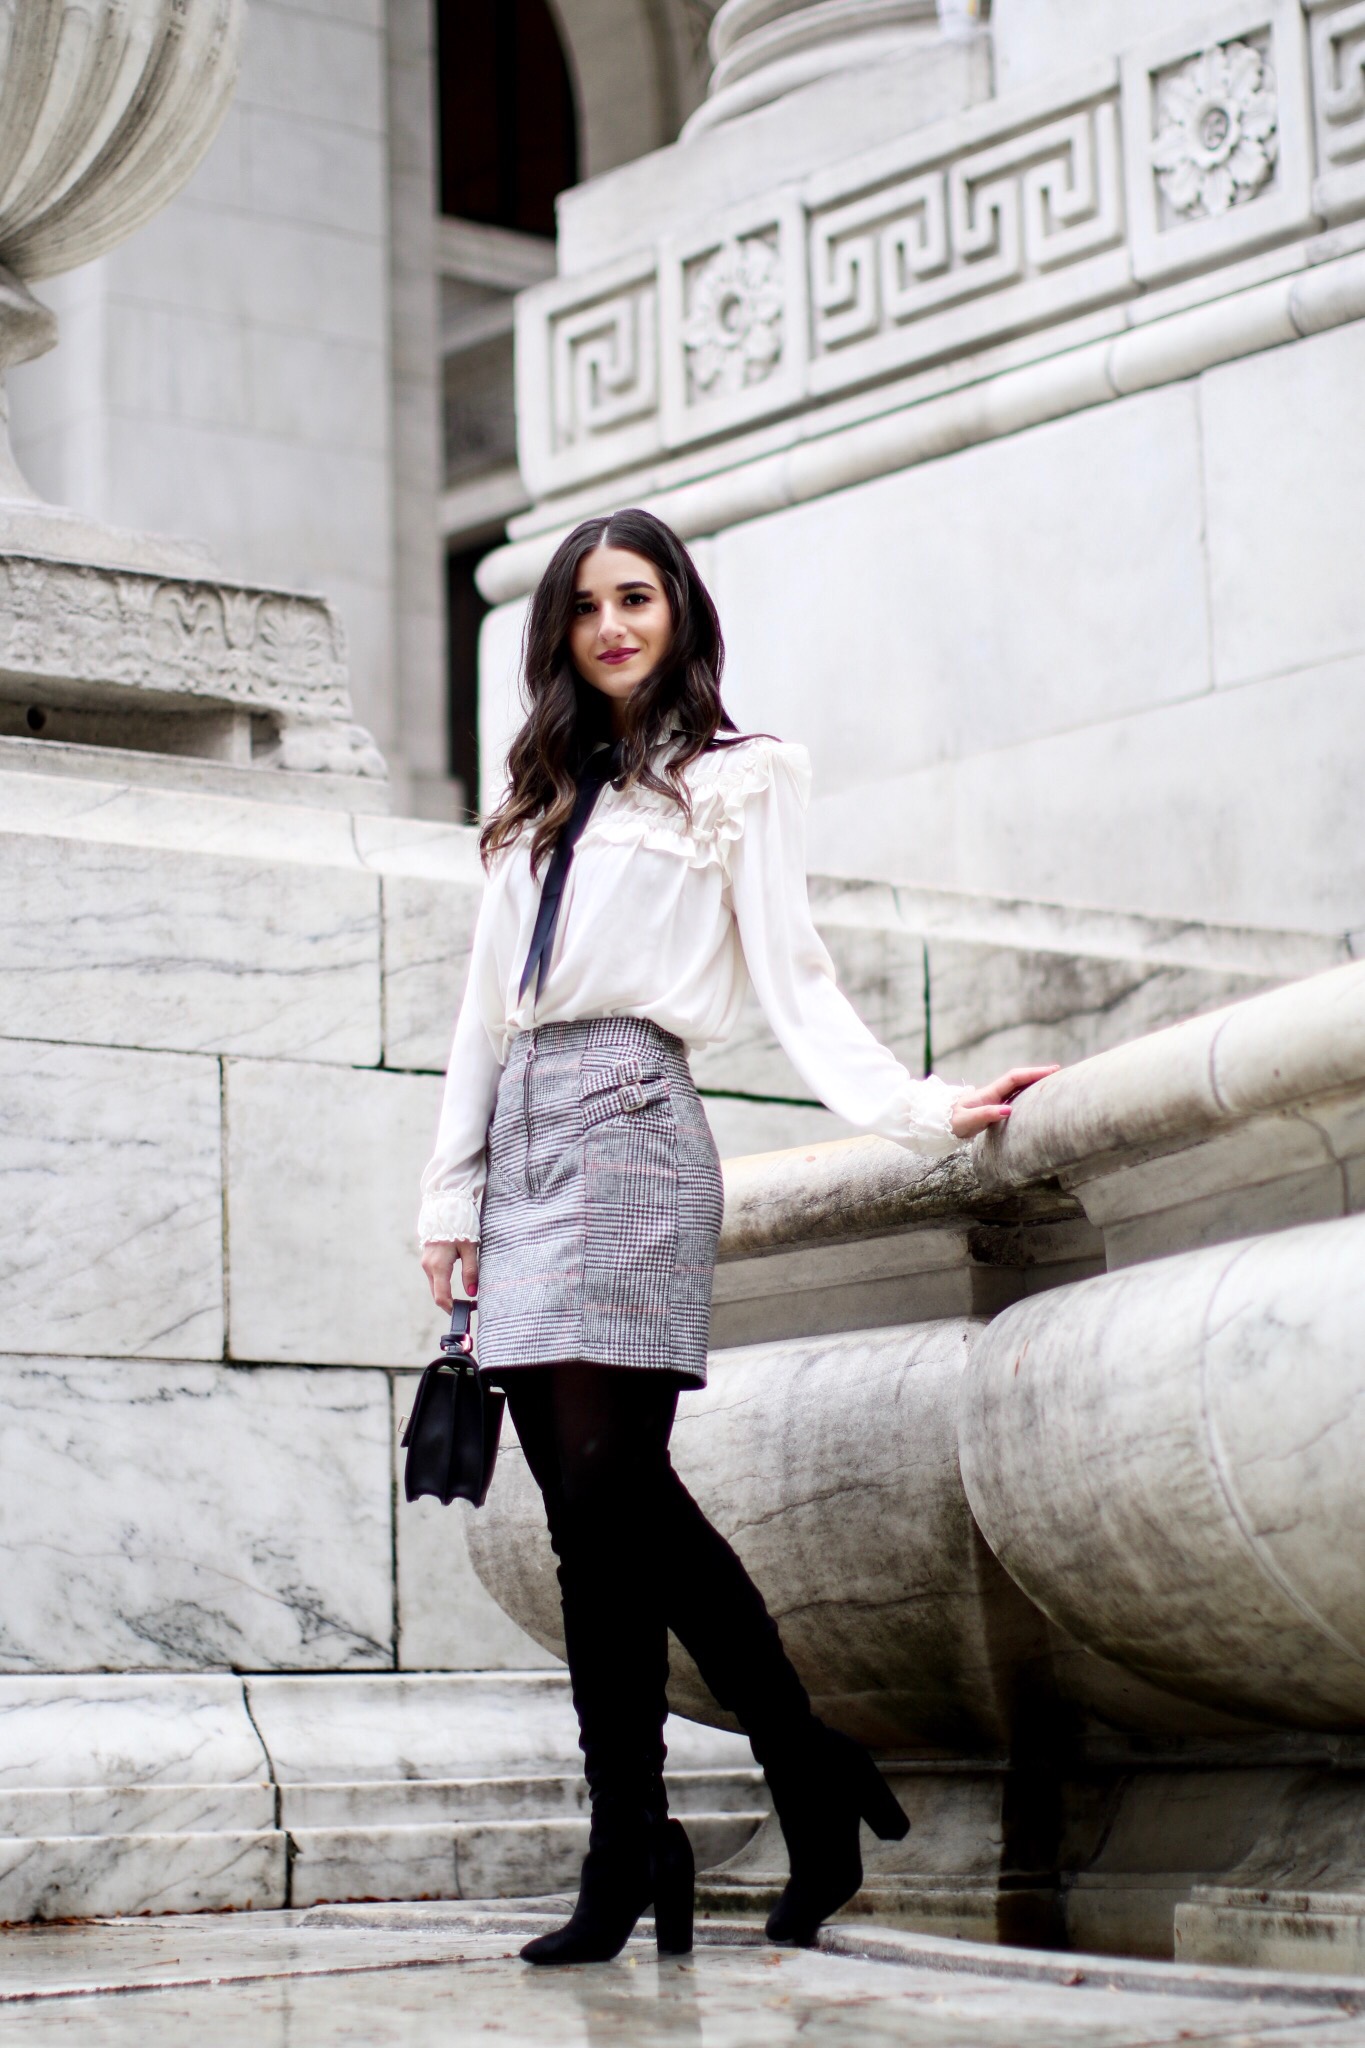 White Bow Blouse Grey Plaid Skirt 5 Tips To Meet Your Deadlines Esther Santer Fashion Blog NYC Street Style Blogger Outfit OOTD Trendy Black Bow Over The Knee Boots Girl Women Sophisticated Classy Feminine Shoes Henri Bendel  West 57th Schoolbag Shop.JPG